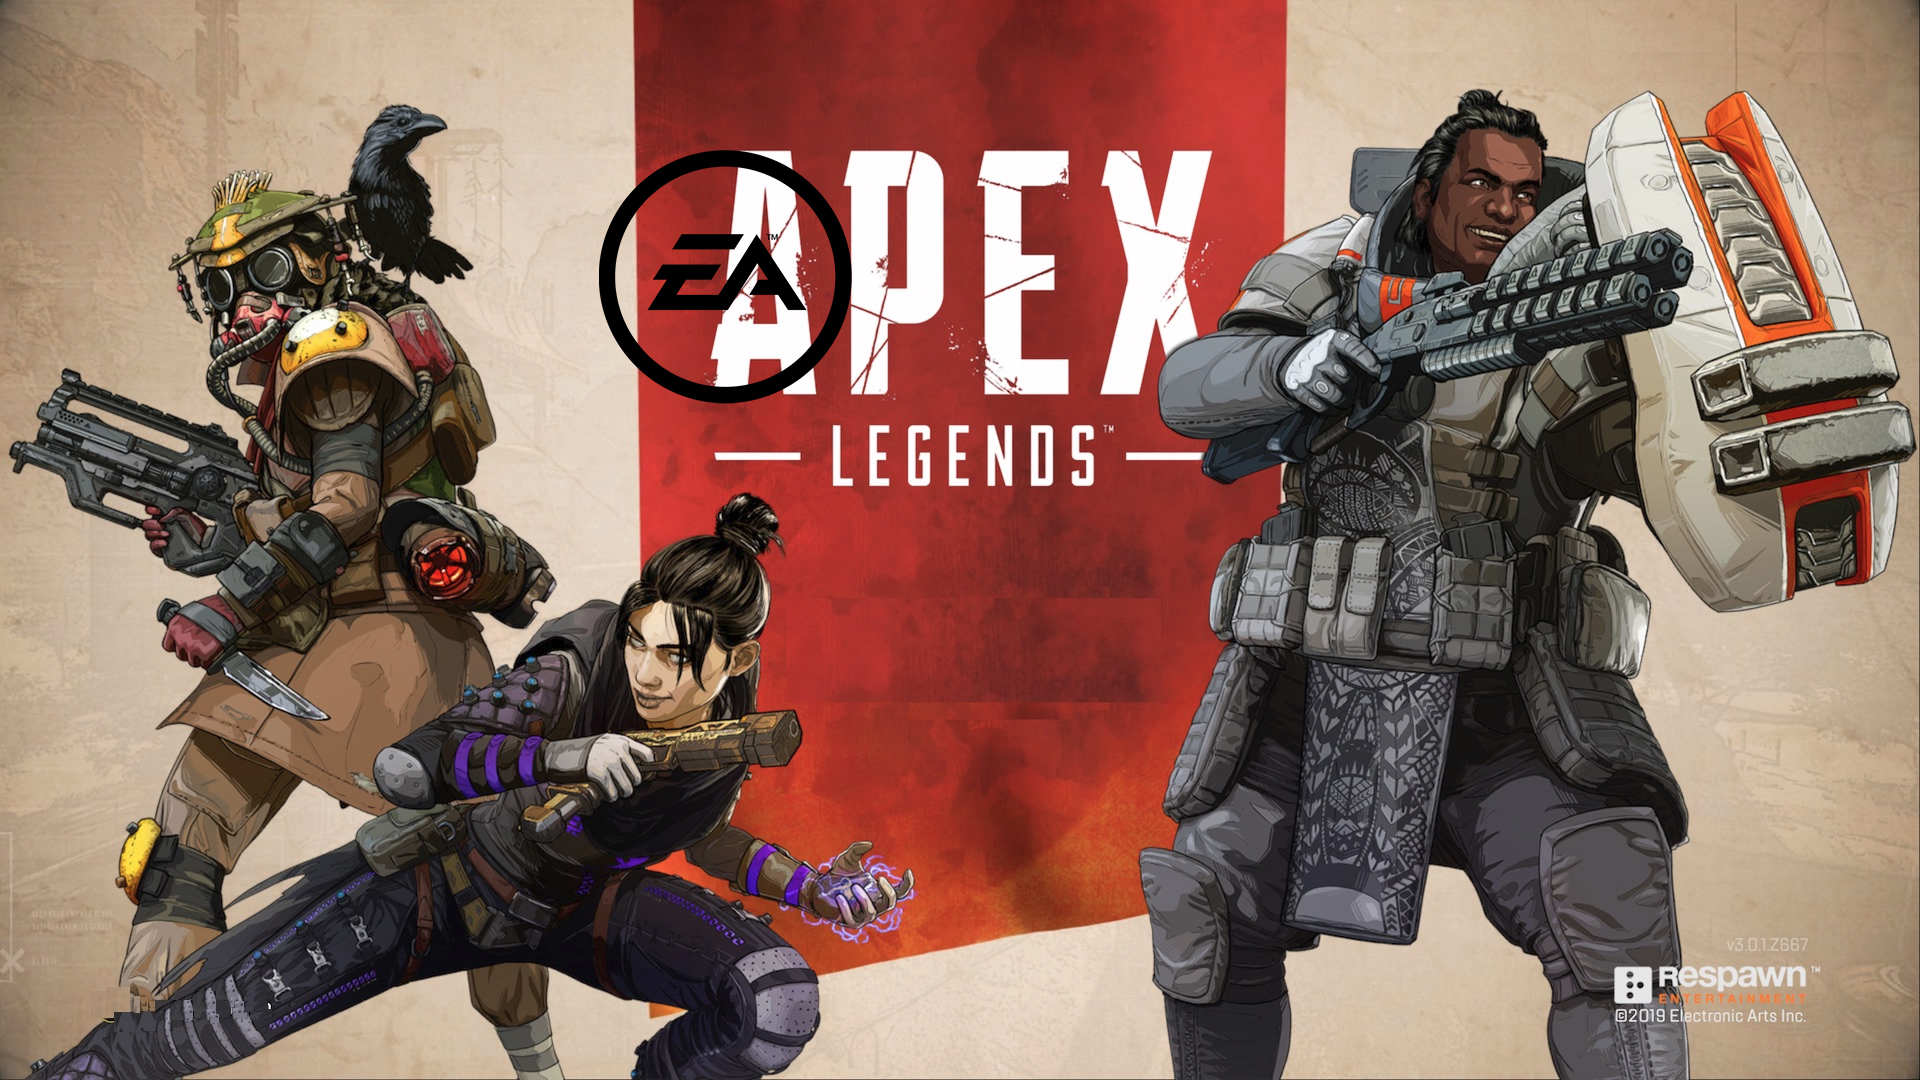 Apex Legends Season Two Trailers Show Invading Creatures, New Areas